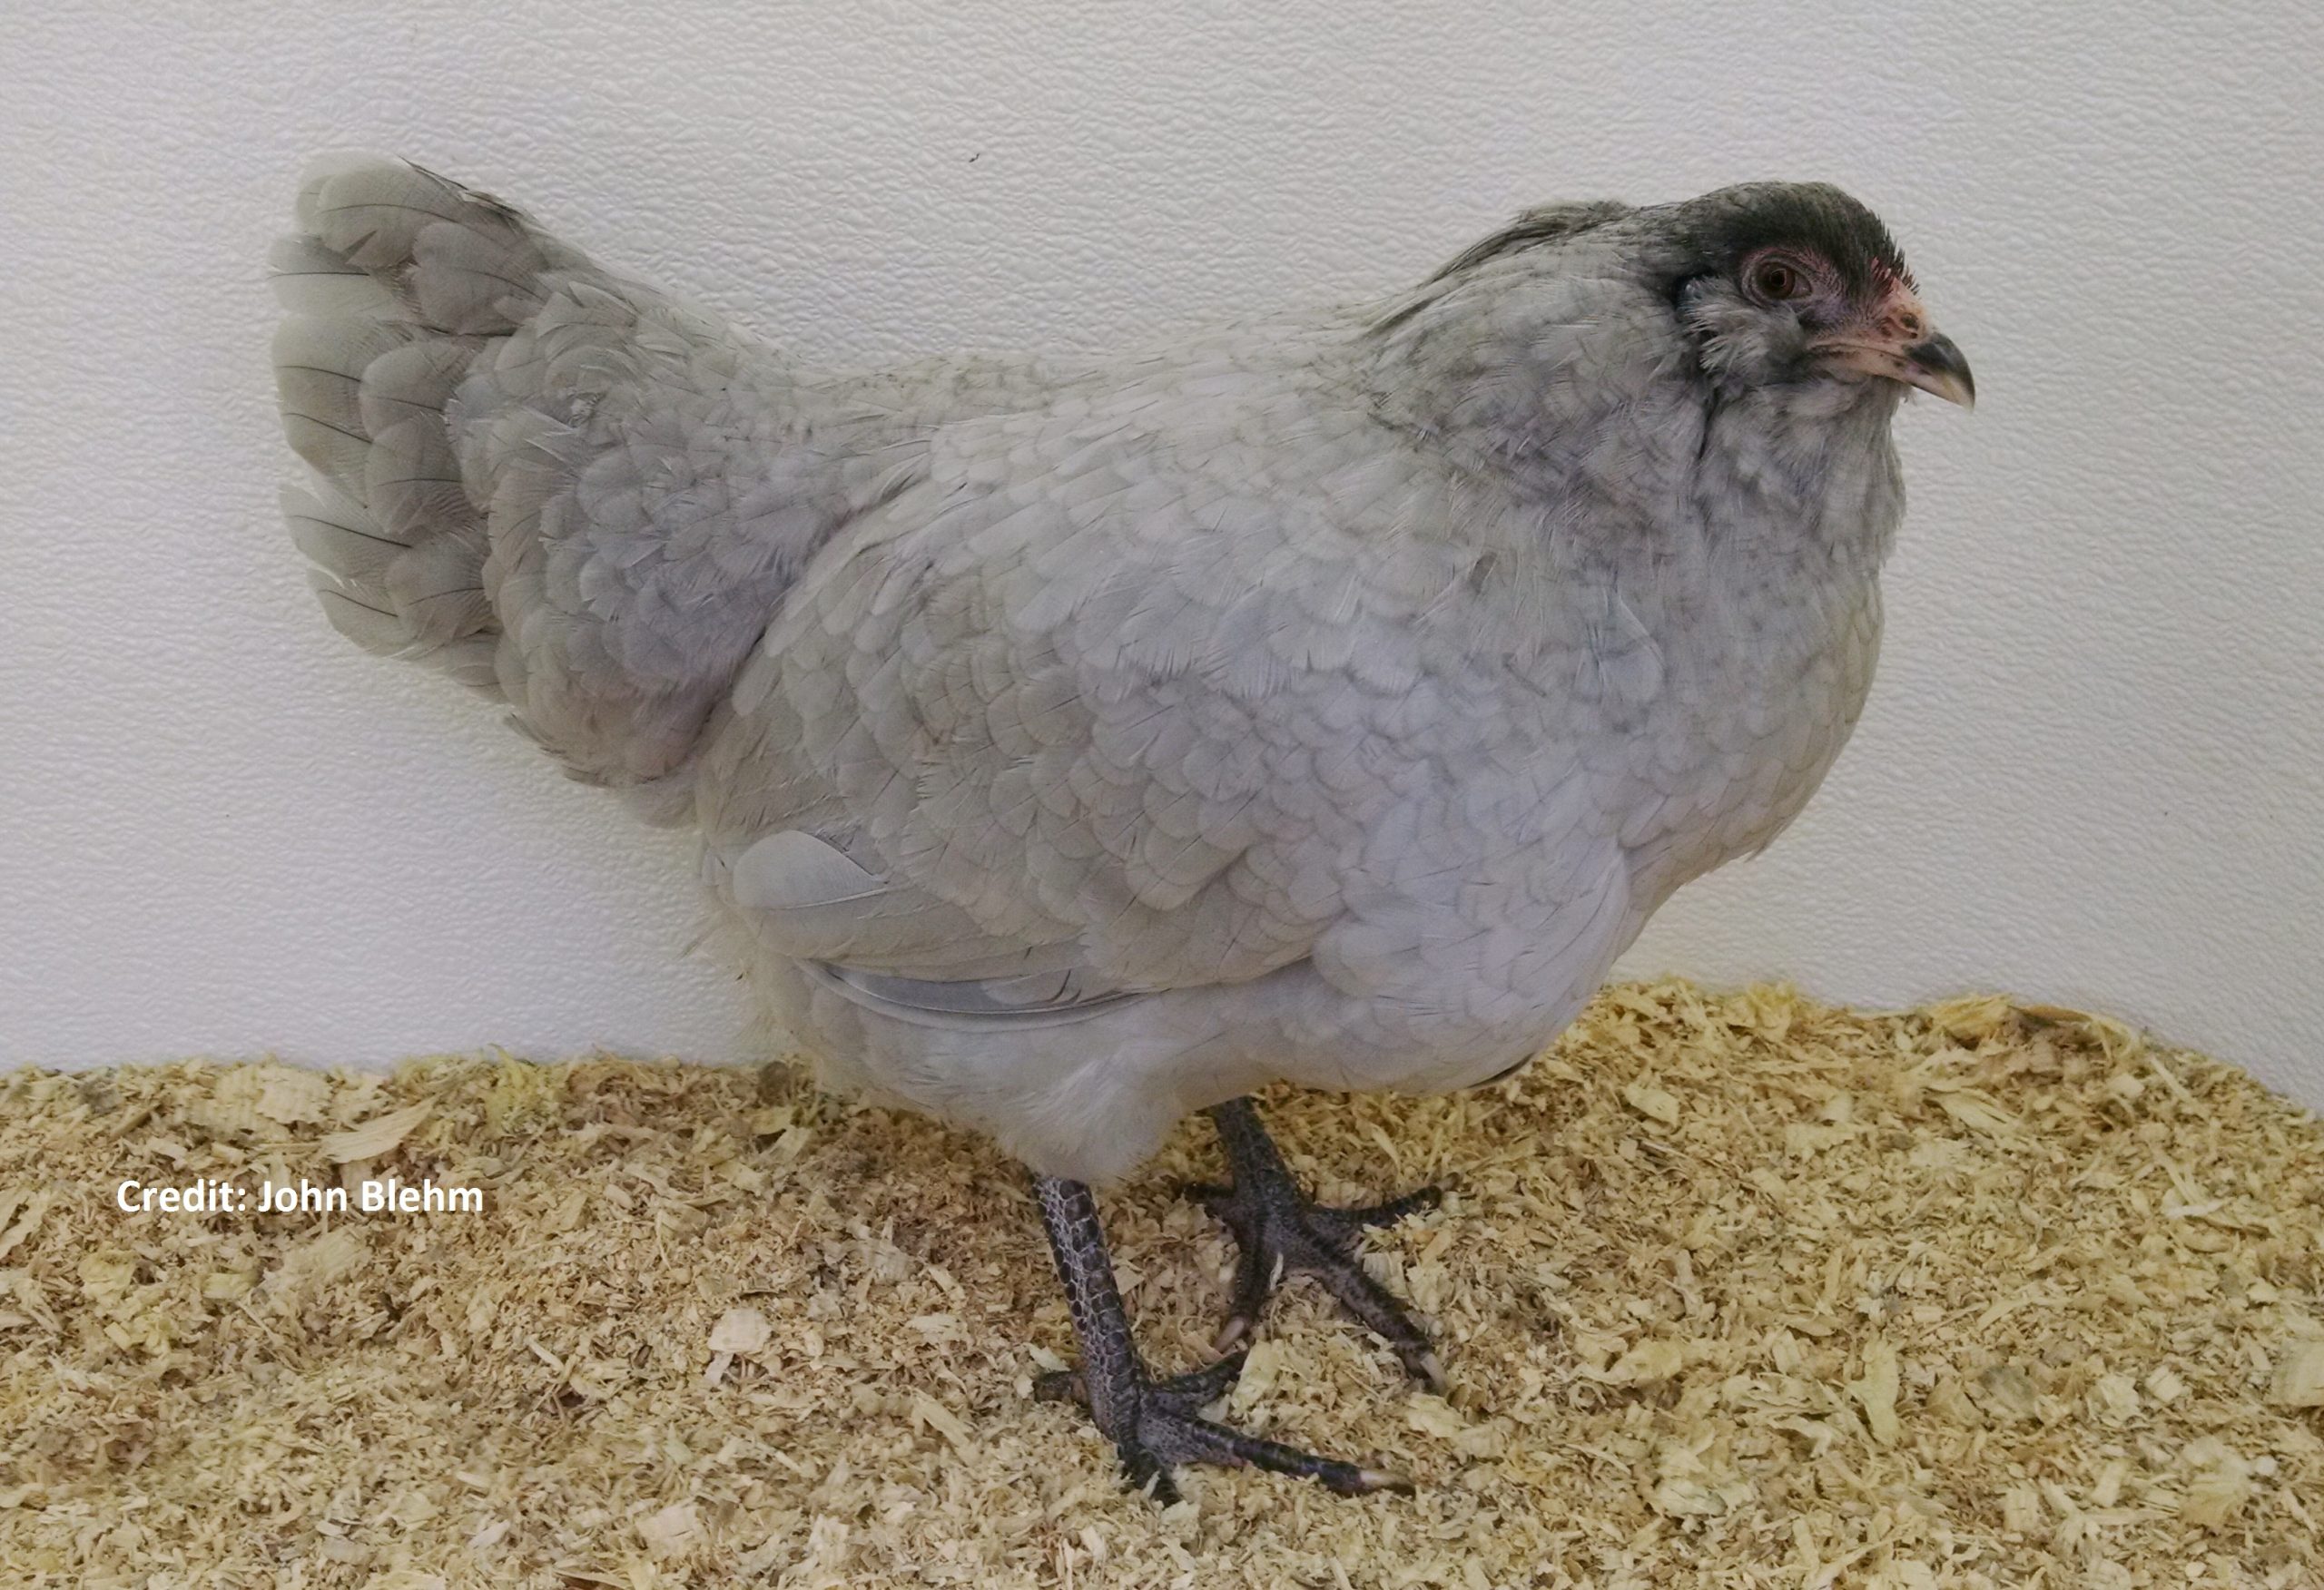 Details about   24 Lavender Wheaten Ameraucana Hatching EggsSpecial listing For  timgre38 